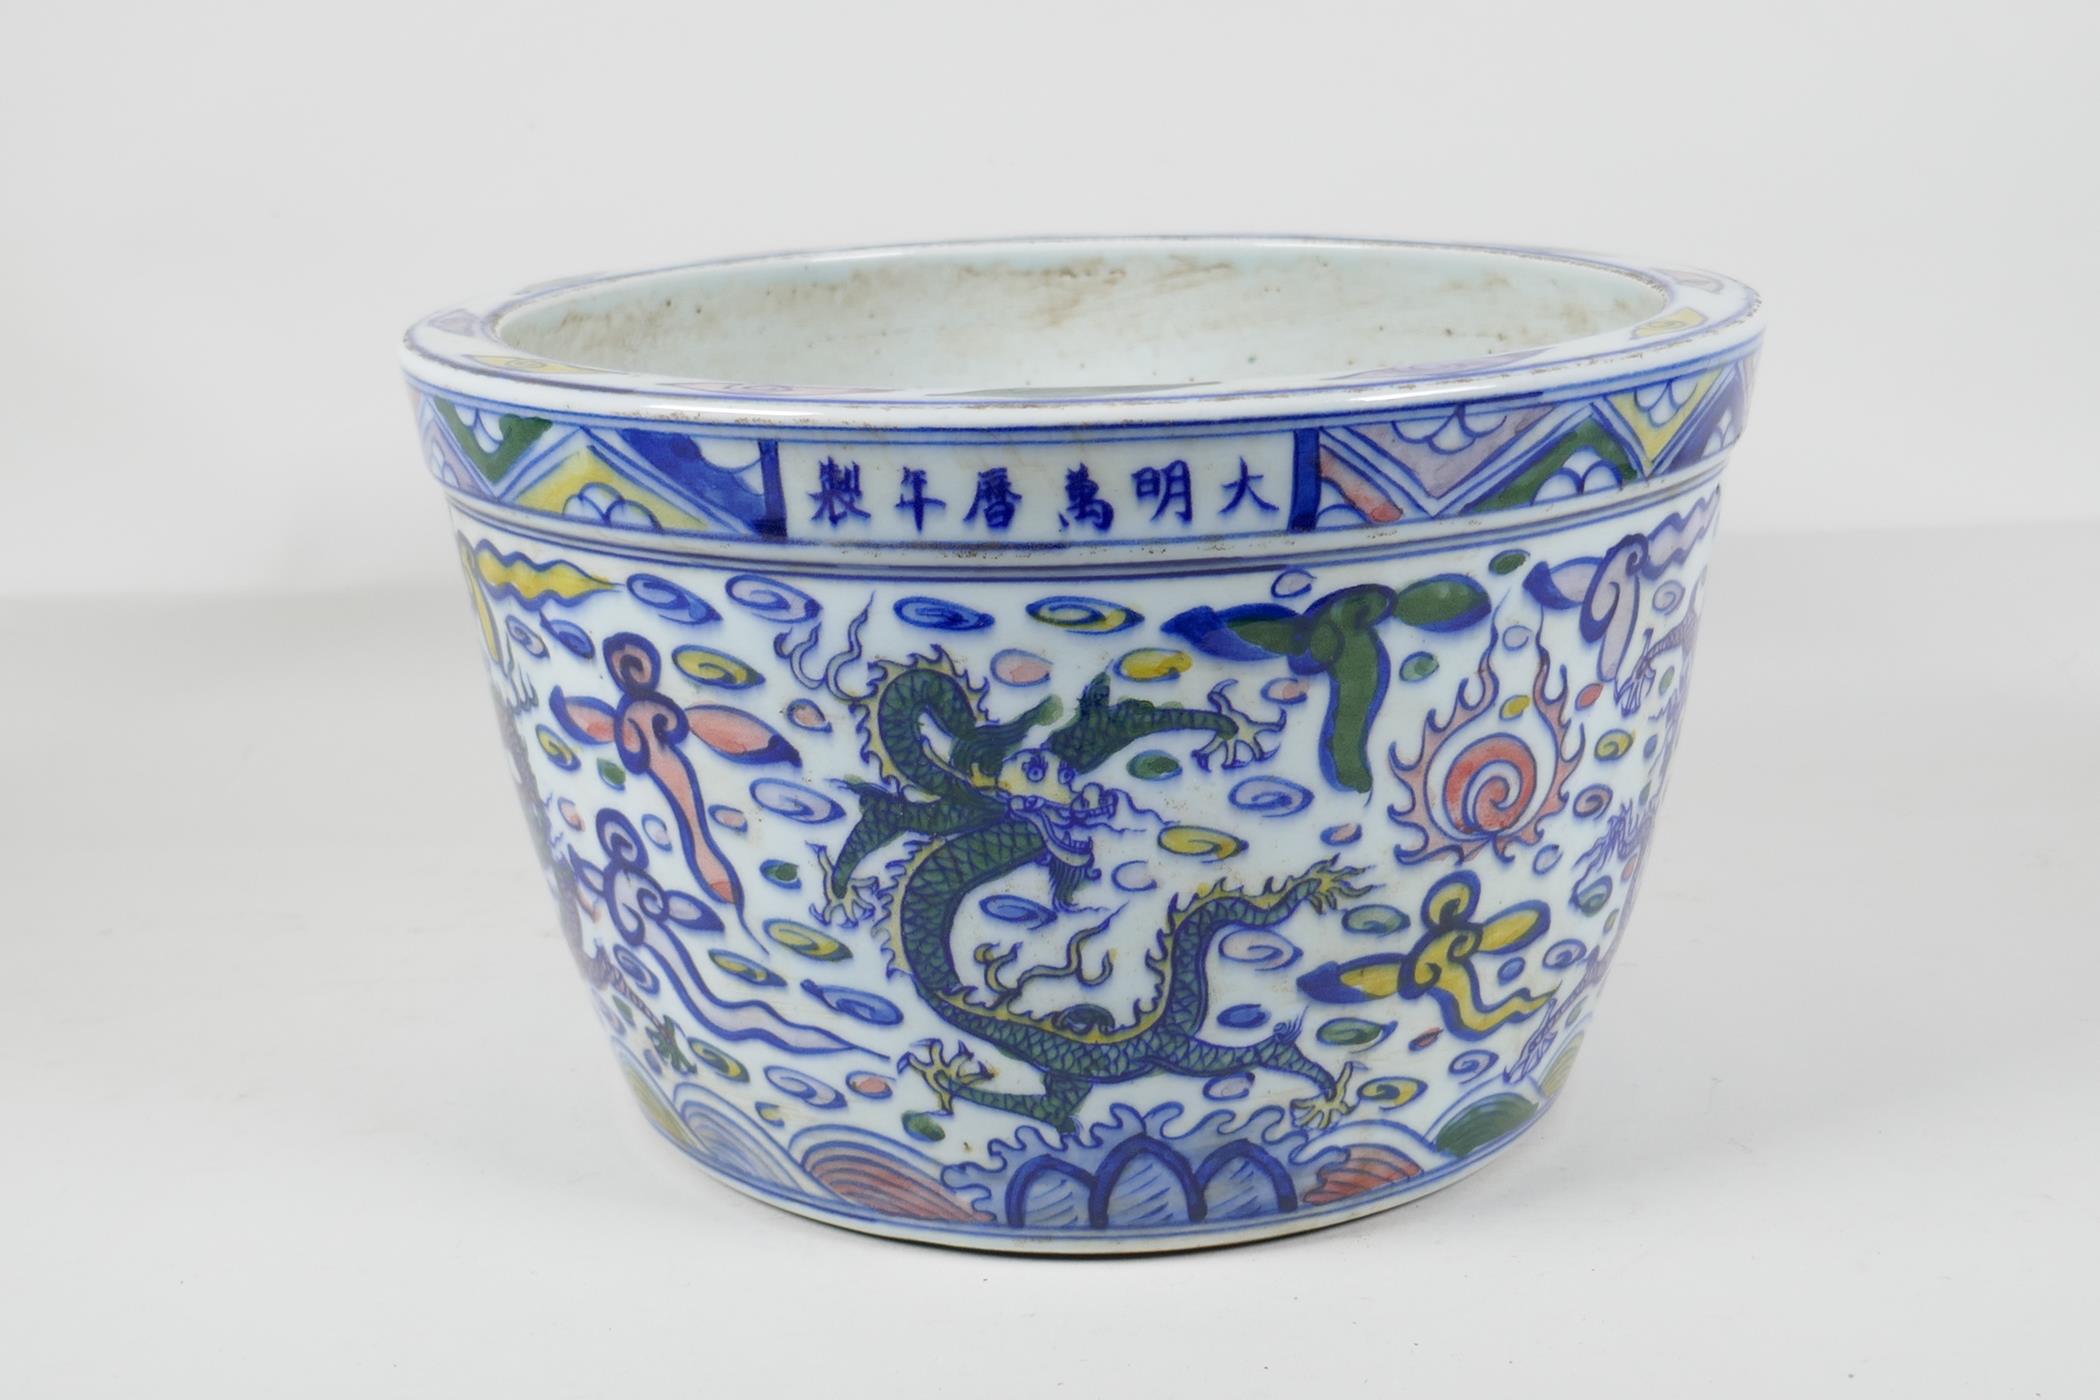 A Chinese Wucai style porcelain jardinere, decorated with dragons & the flaming pearl, 6 character